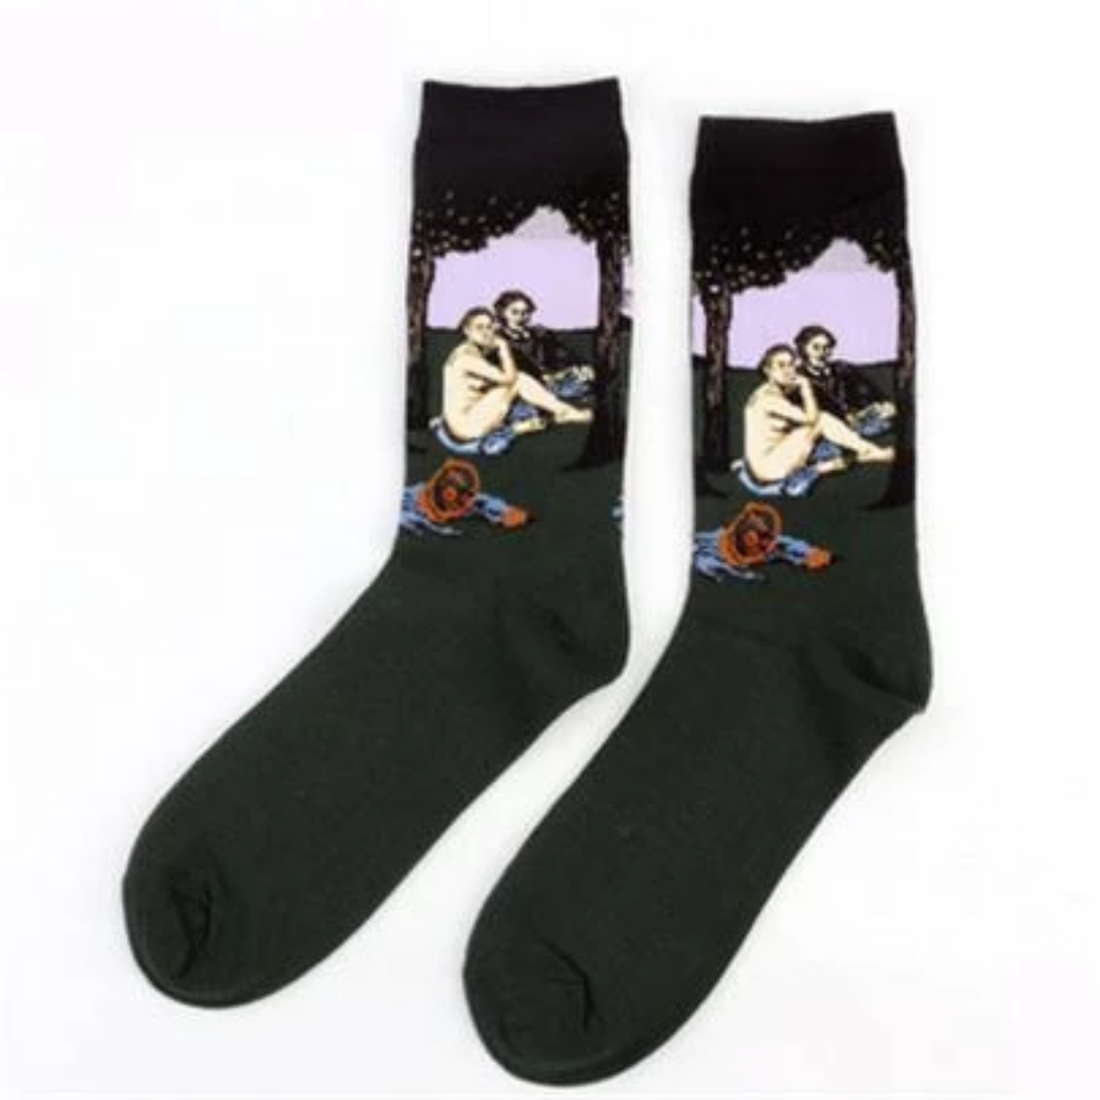 Women's Autumn/Winter Casual Cotton Socks With Print